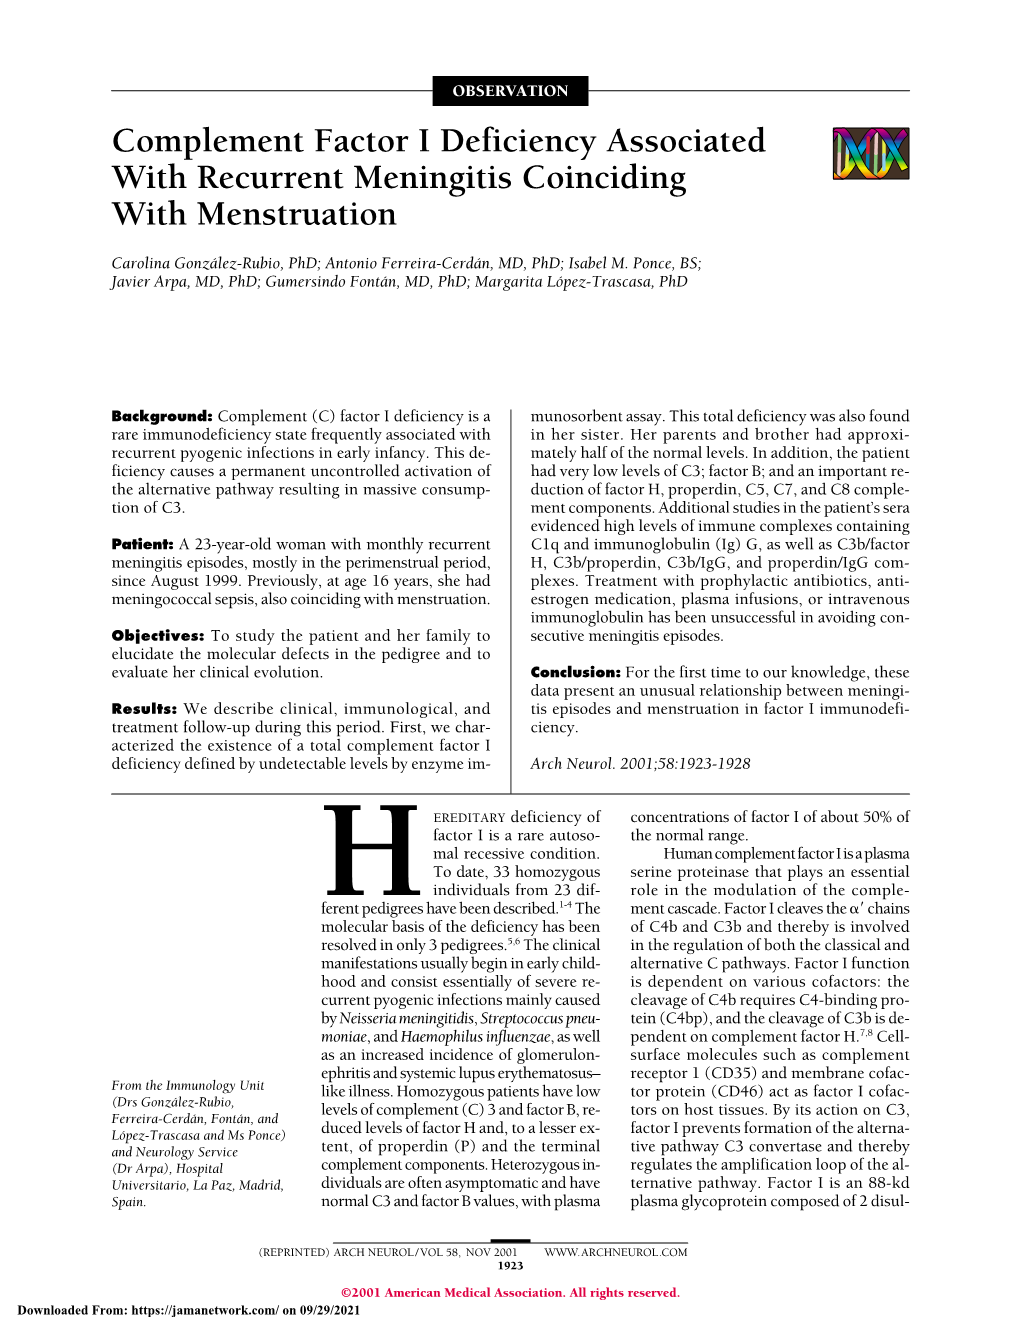 Complement Factor I Deficiency Associated with Recurrent Meningitis Coinciding with Menstruation